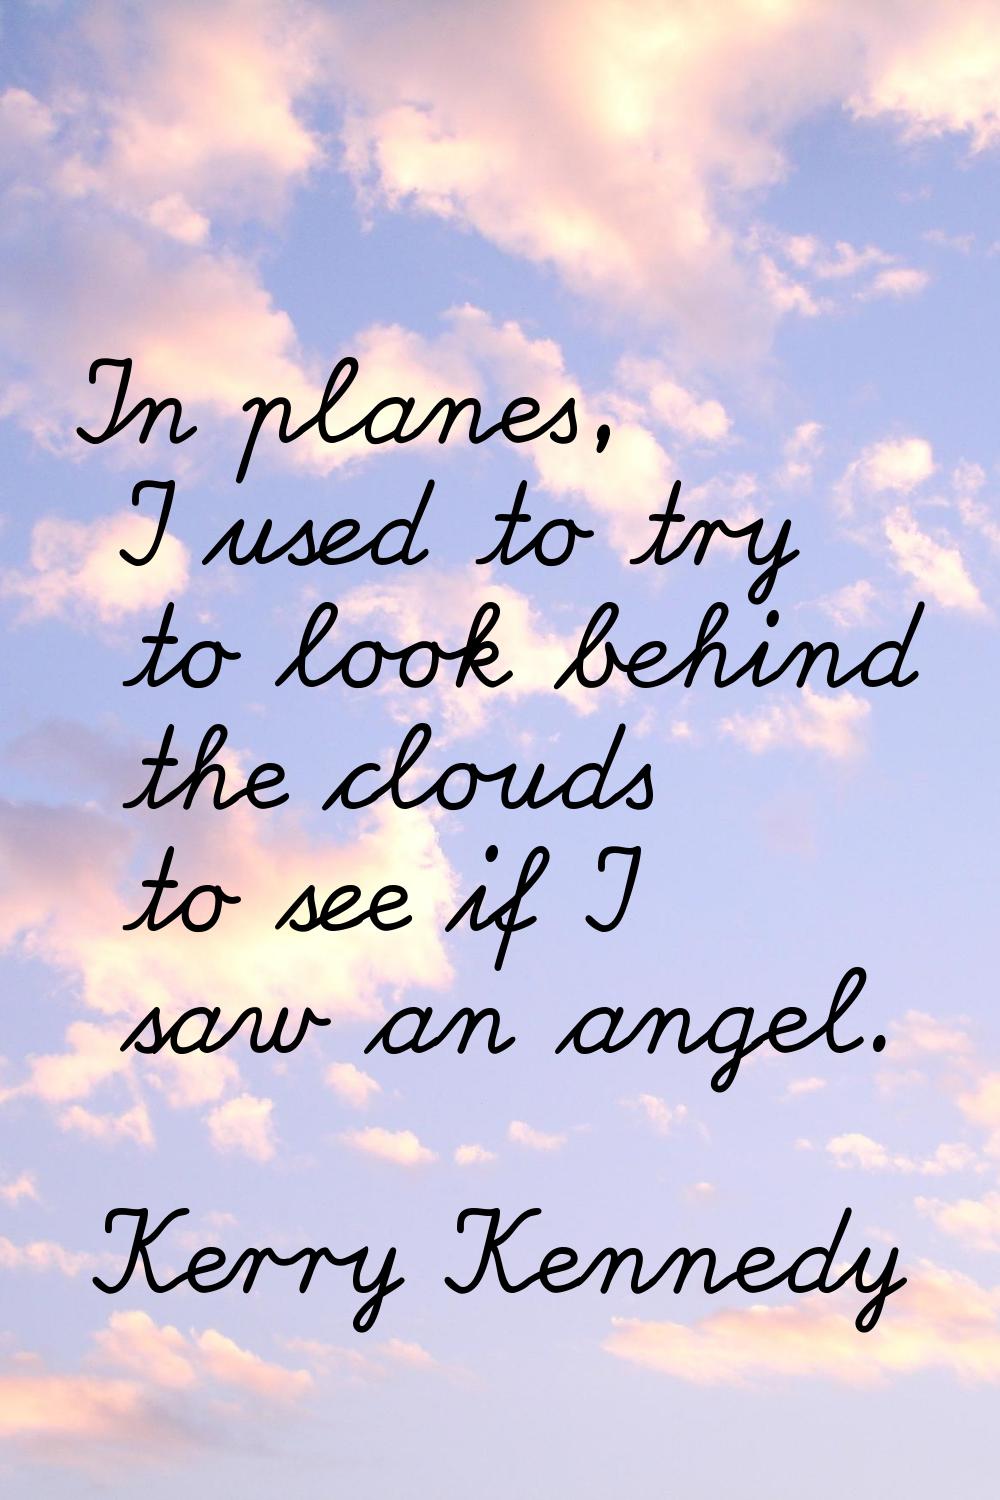 In planes, I used to try to look behind the clouds to see if I saw an angel.